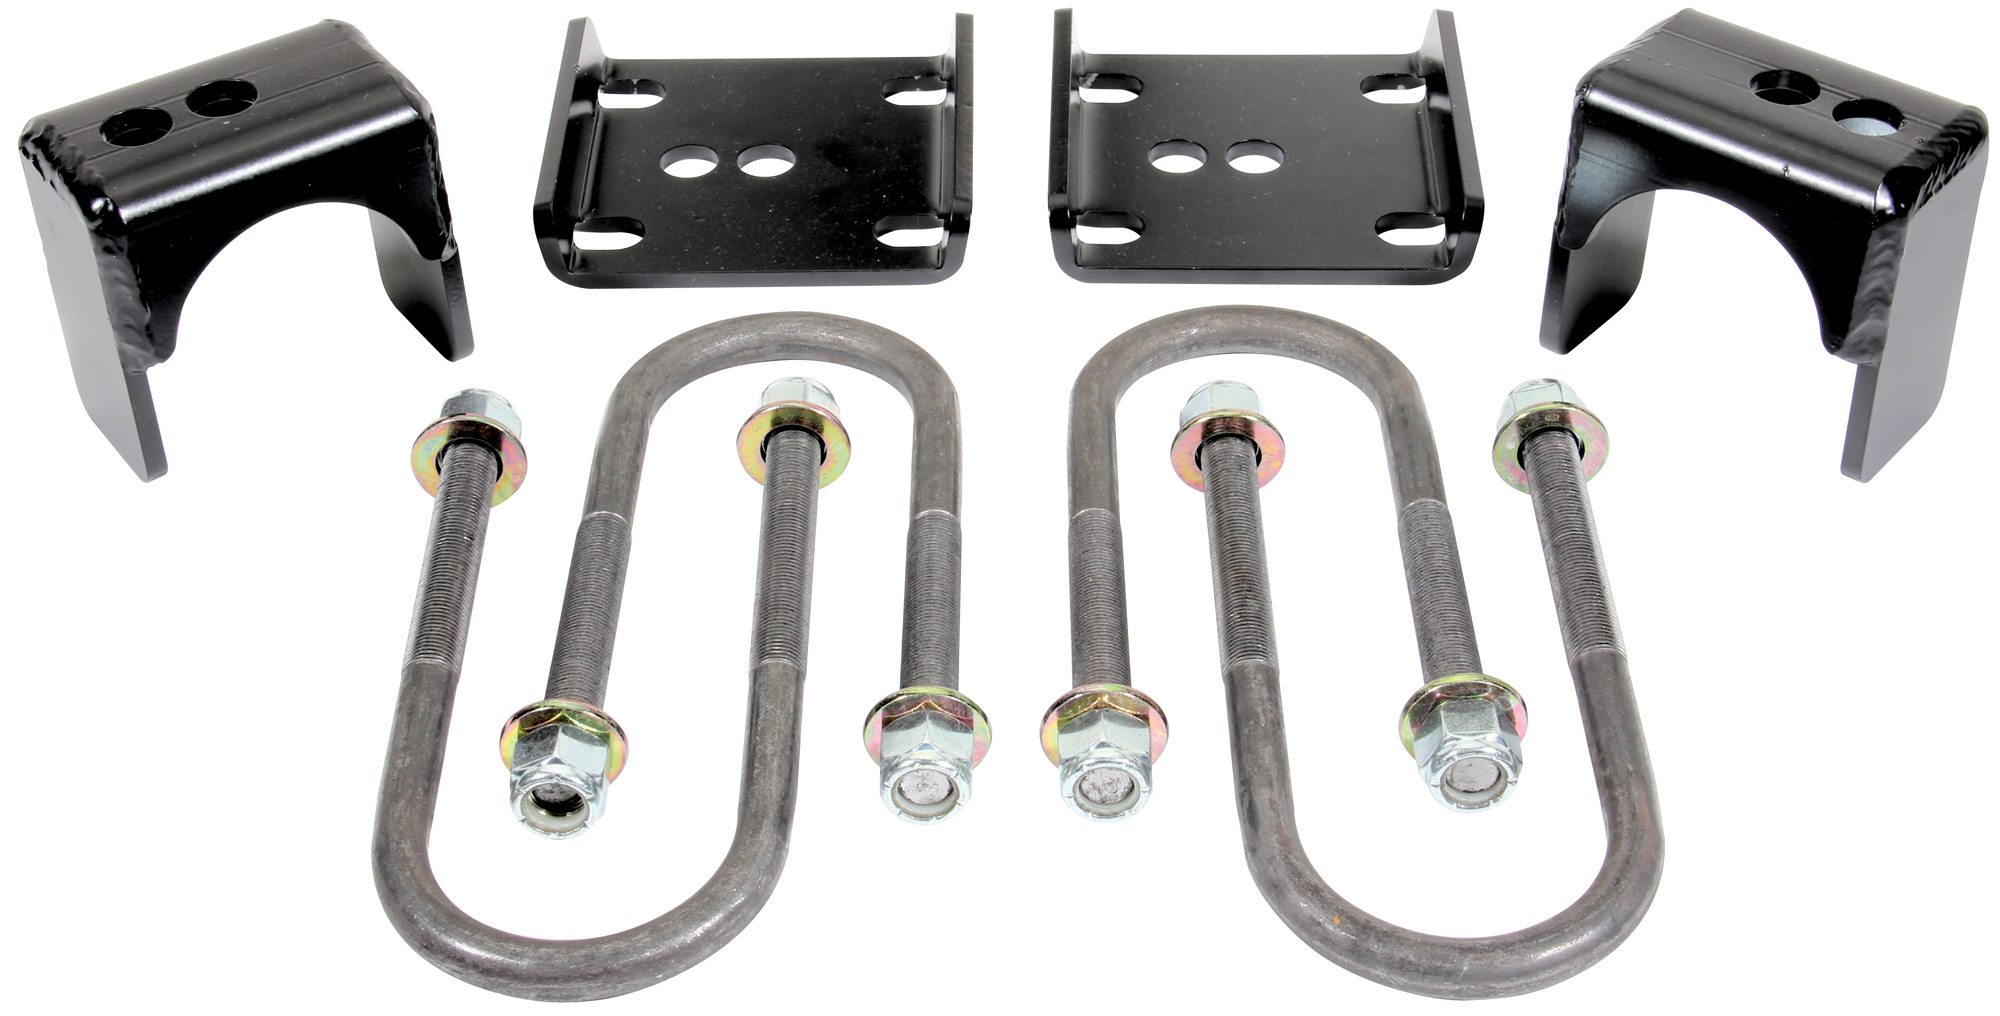 1973-87 C10 6. This rear axle flip kit will allow you to lower the rear of ...